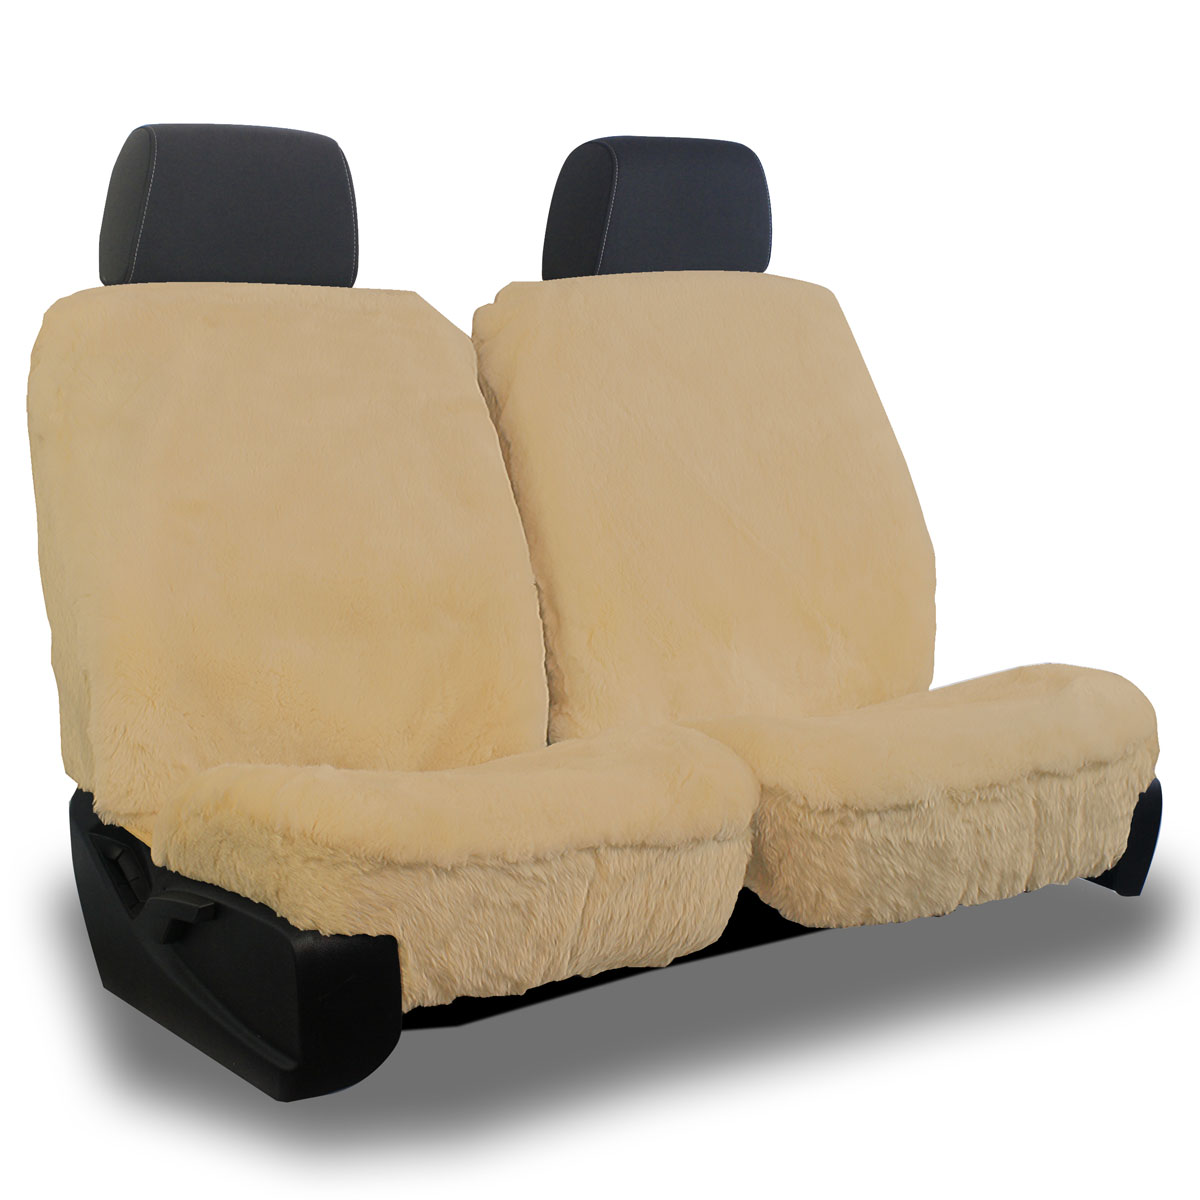 https://autohq.com/images/products/superlamb_universal-sheepskin-seat-cover_palomino.jpg